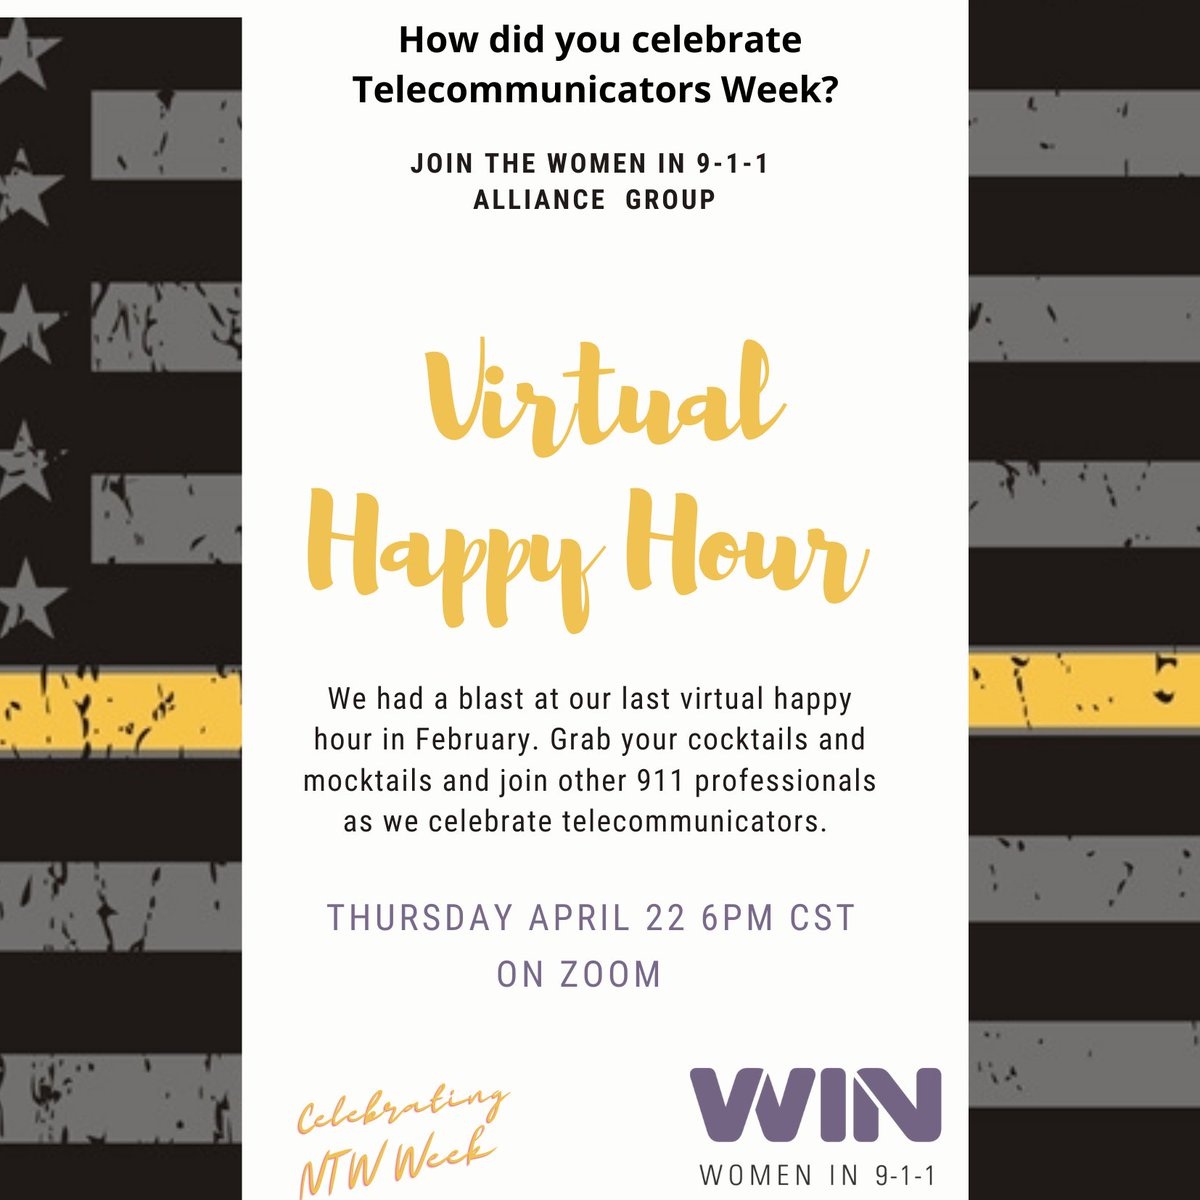 Tune in for a virtual happy hour with the Women in 9-1-1 on April 22! They're celebrating TC week and we can't think of a better way! #womenin911